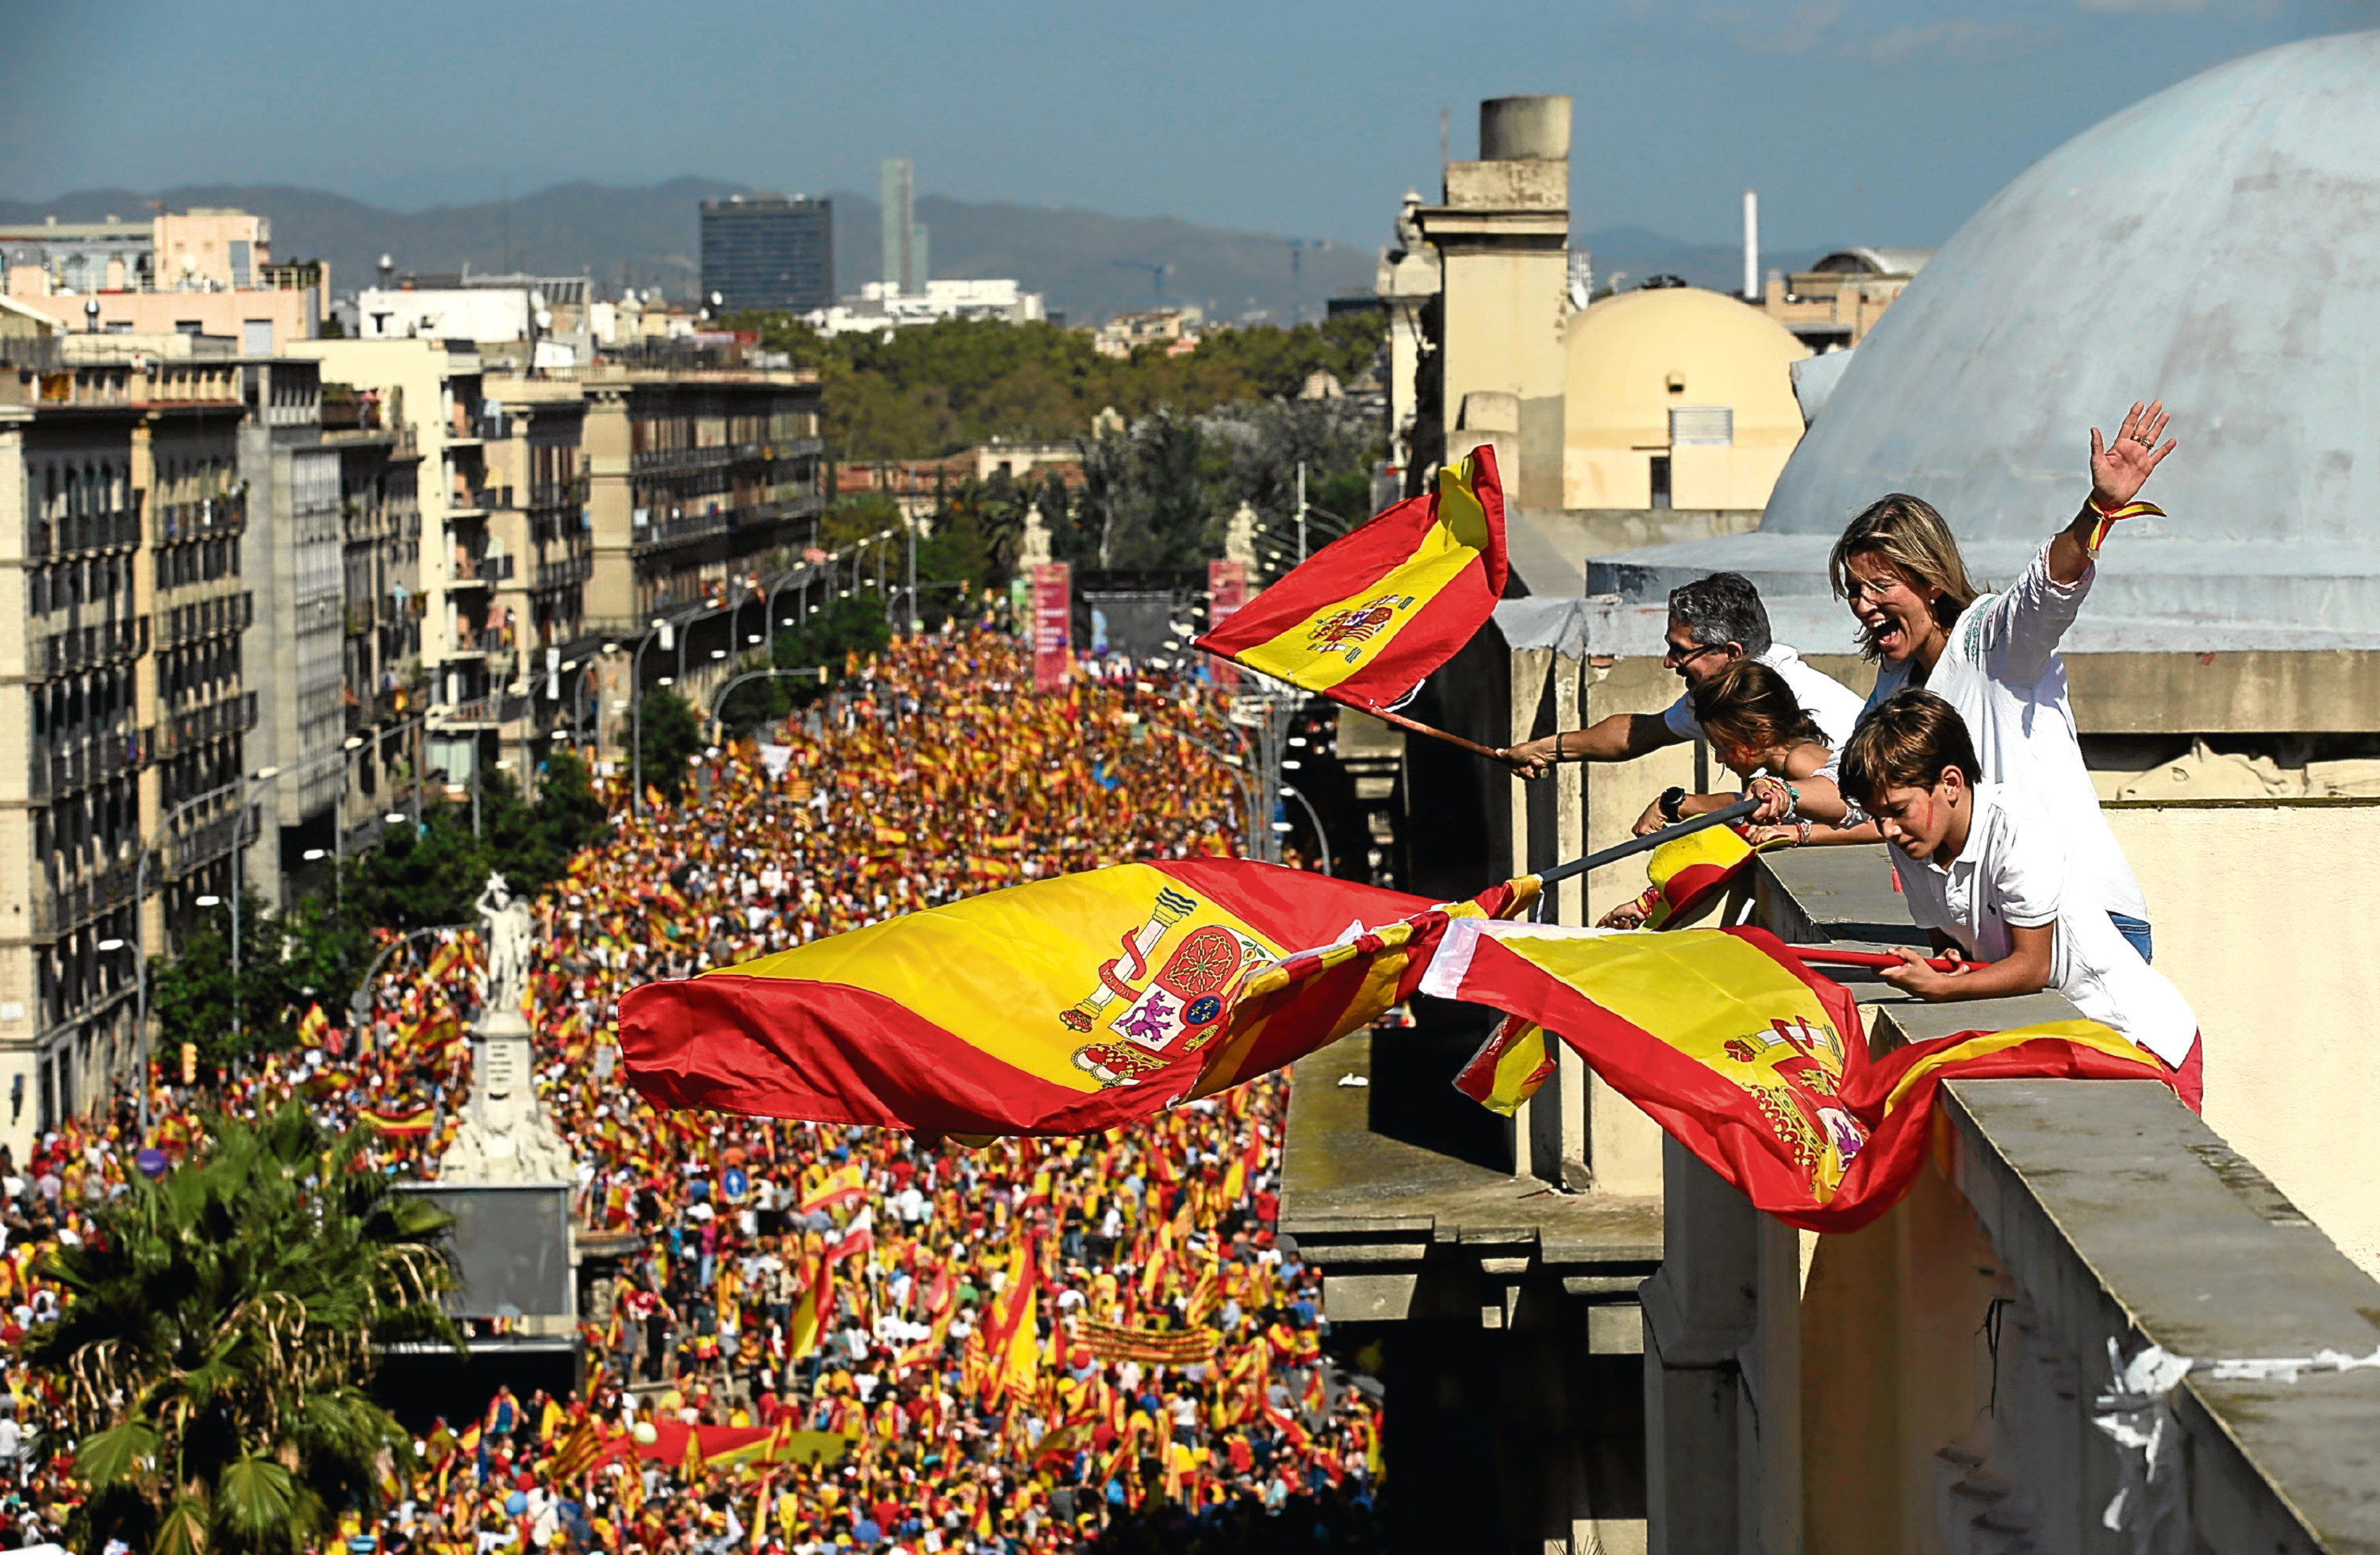 People on a rooftop wave Spanish flags during a march in downtown Barcelona, Spain, to protest the Catalan government's push for secession from the rest of Spain, Sunday Oct. 8, 2017. (AP Photo/Manu Fernandez)